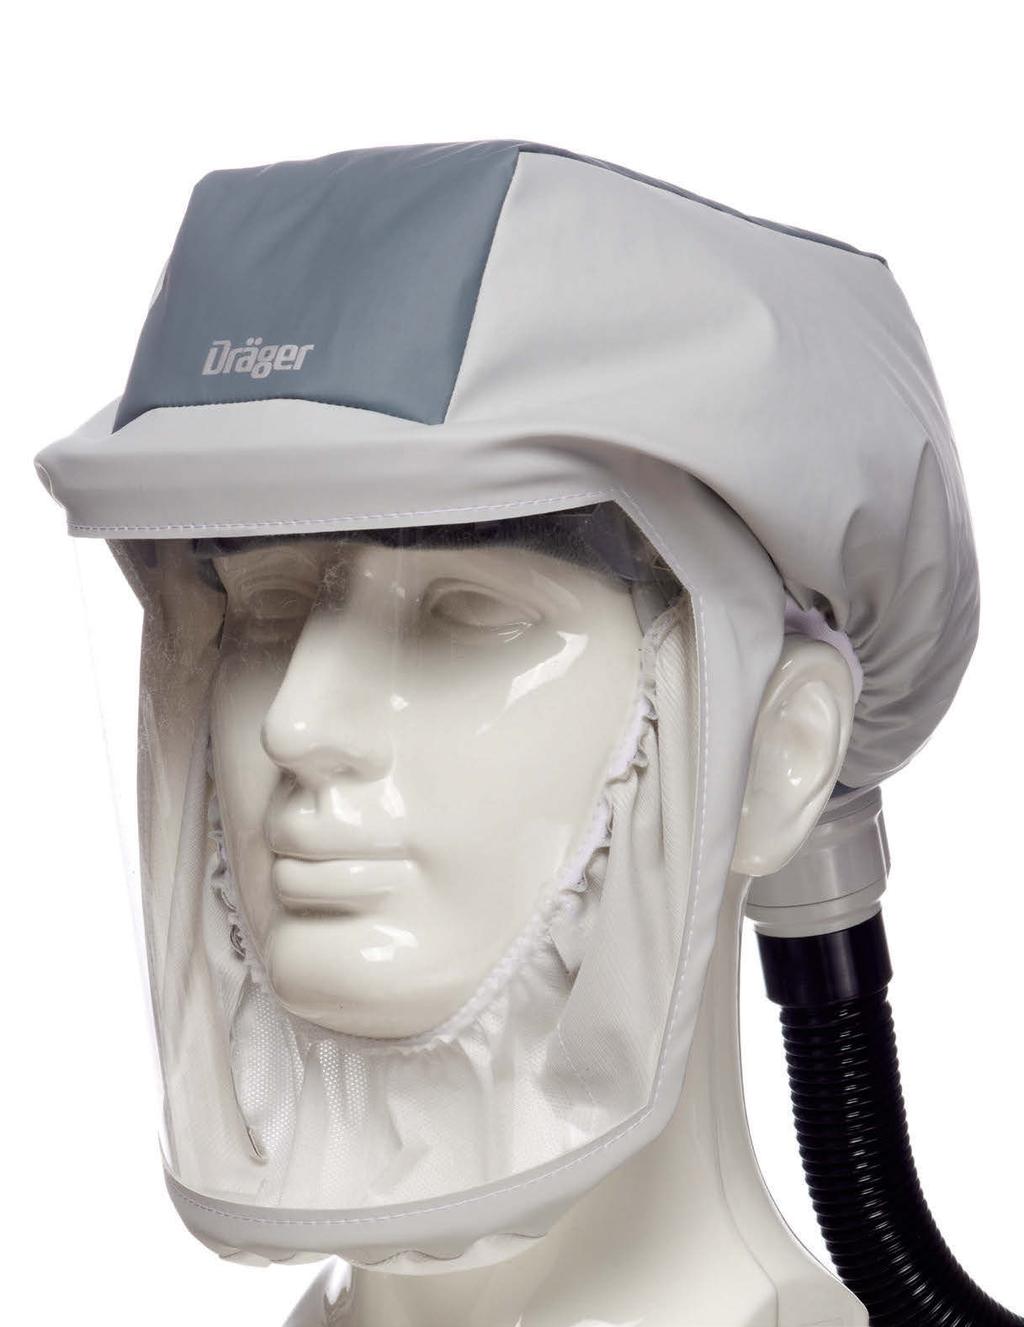 Dräger X-plore 8000 headpieces Hoods, helmets, visors and masks The innovative Dräger X-plore 8000 headpieces are an integral part of our new powered air-purifying respirator (PAPR).